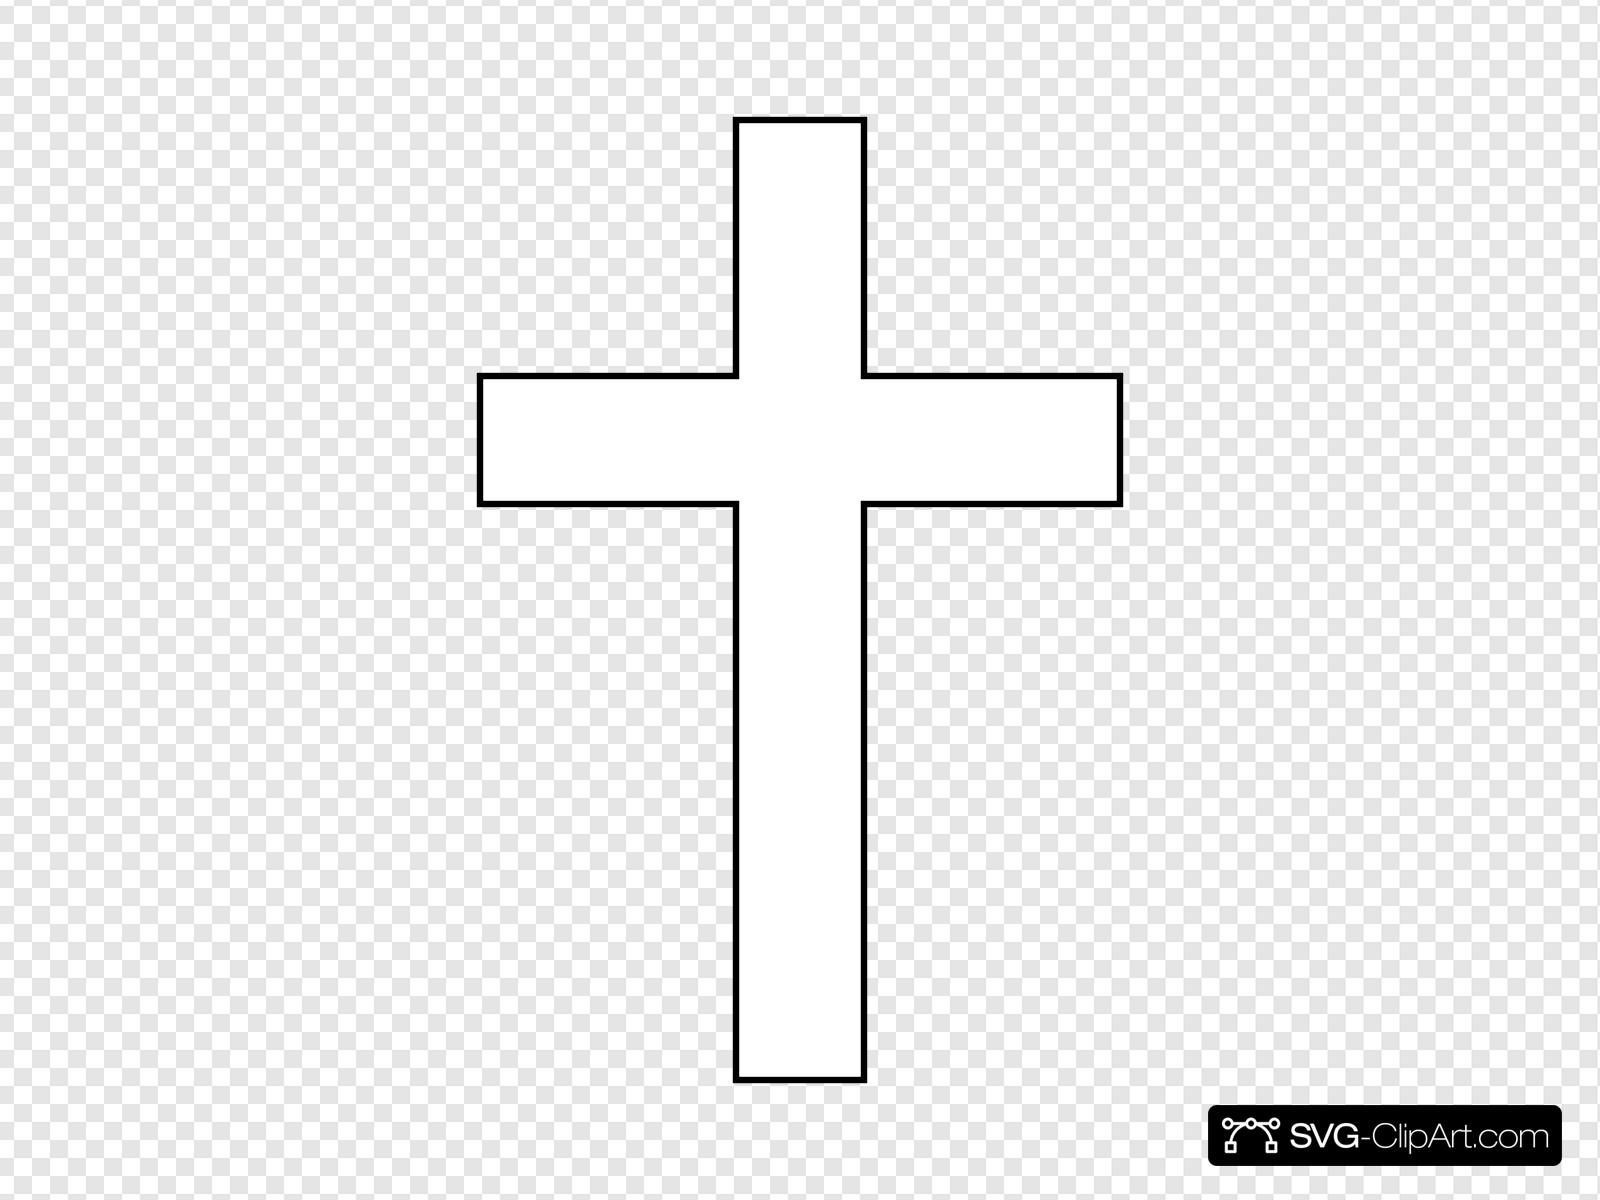 Cross Clip art, Icon and SVG